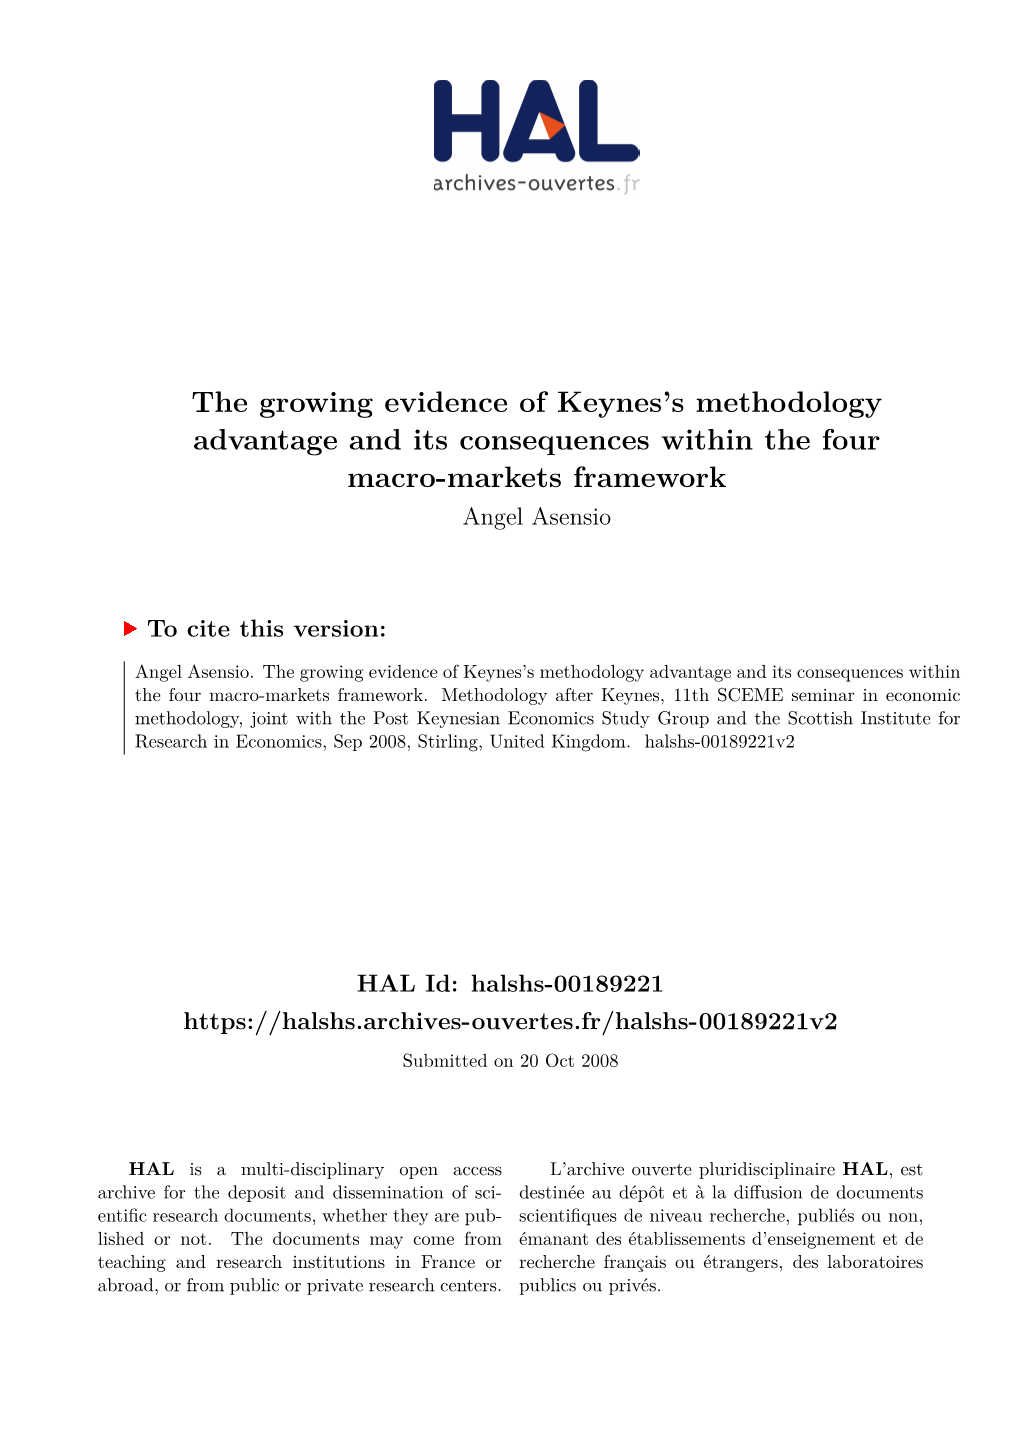 The Growing Evidence of Keynes's Methodology Advantage and Its